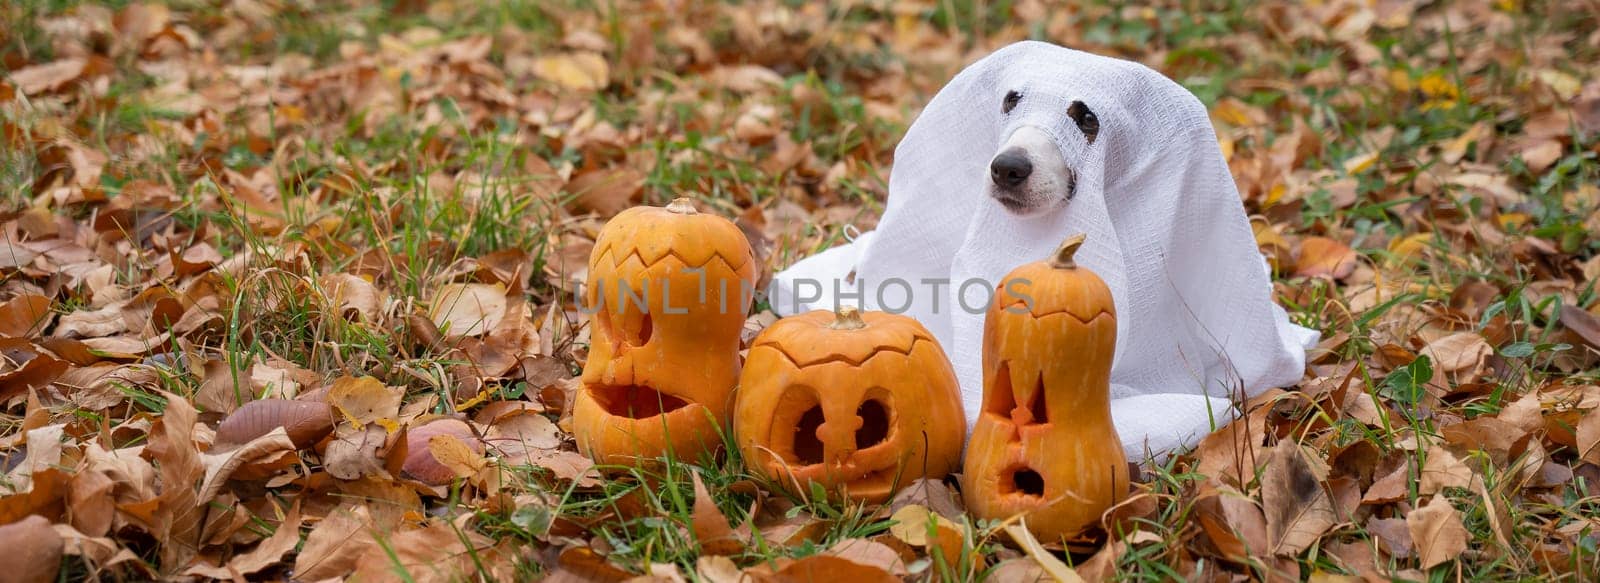 Dog jack russell terrier in a ghost costume with jack-o-lantern pumpkins in the autumn forest